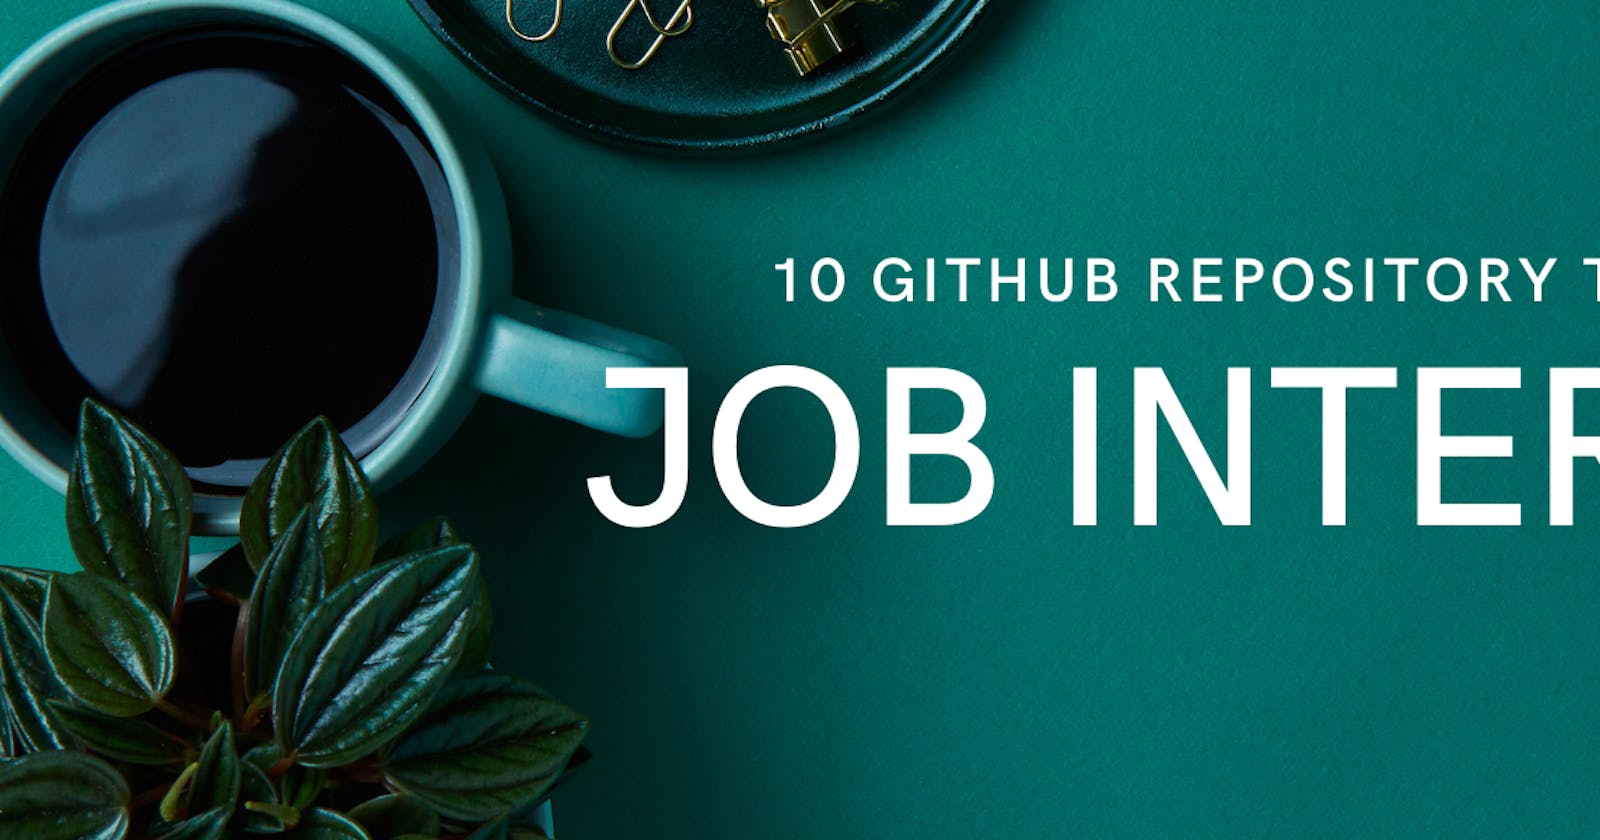 10 GitHub Repository to help Ace Your Job Interview